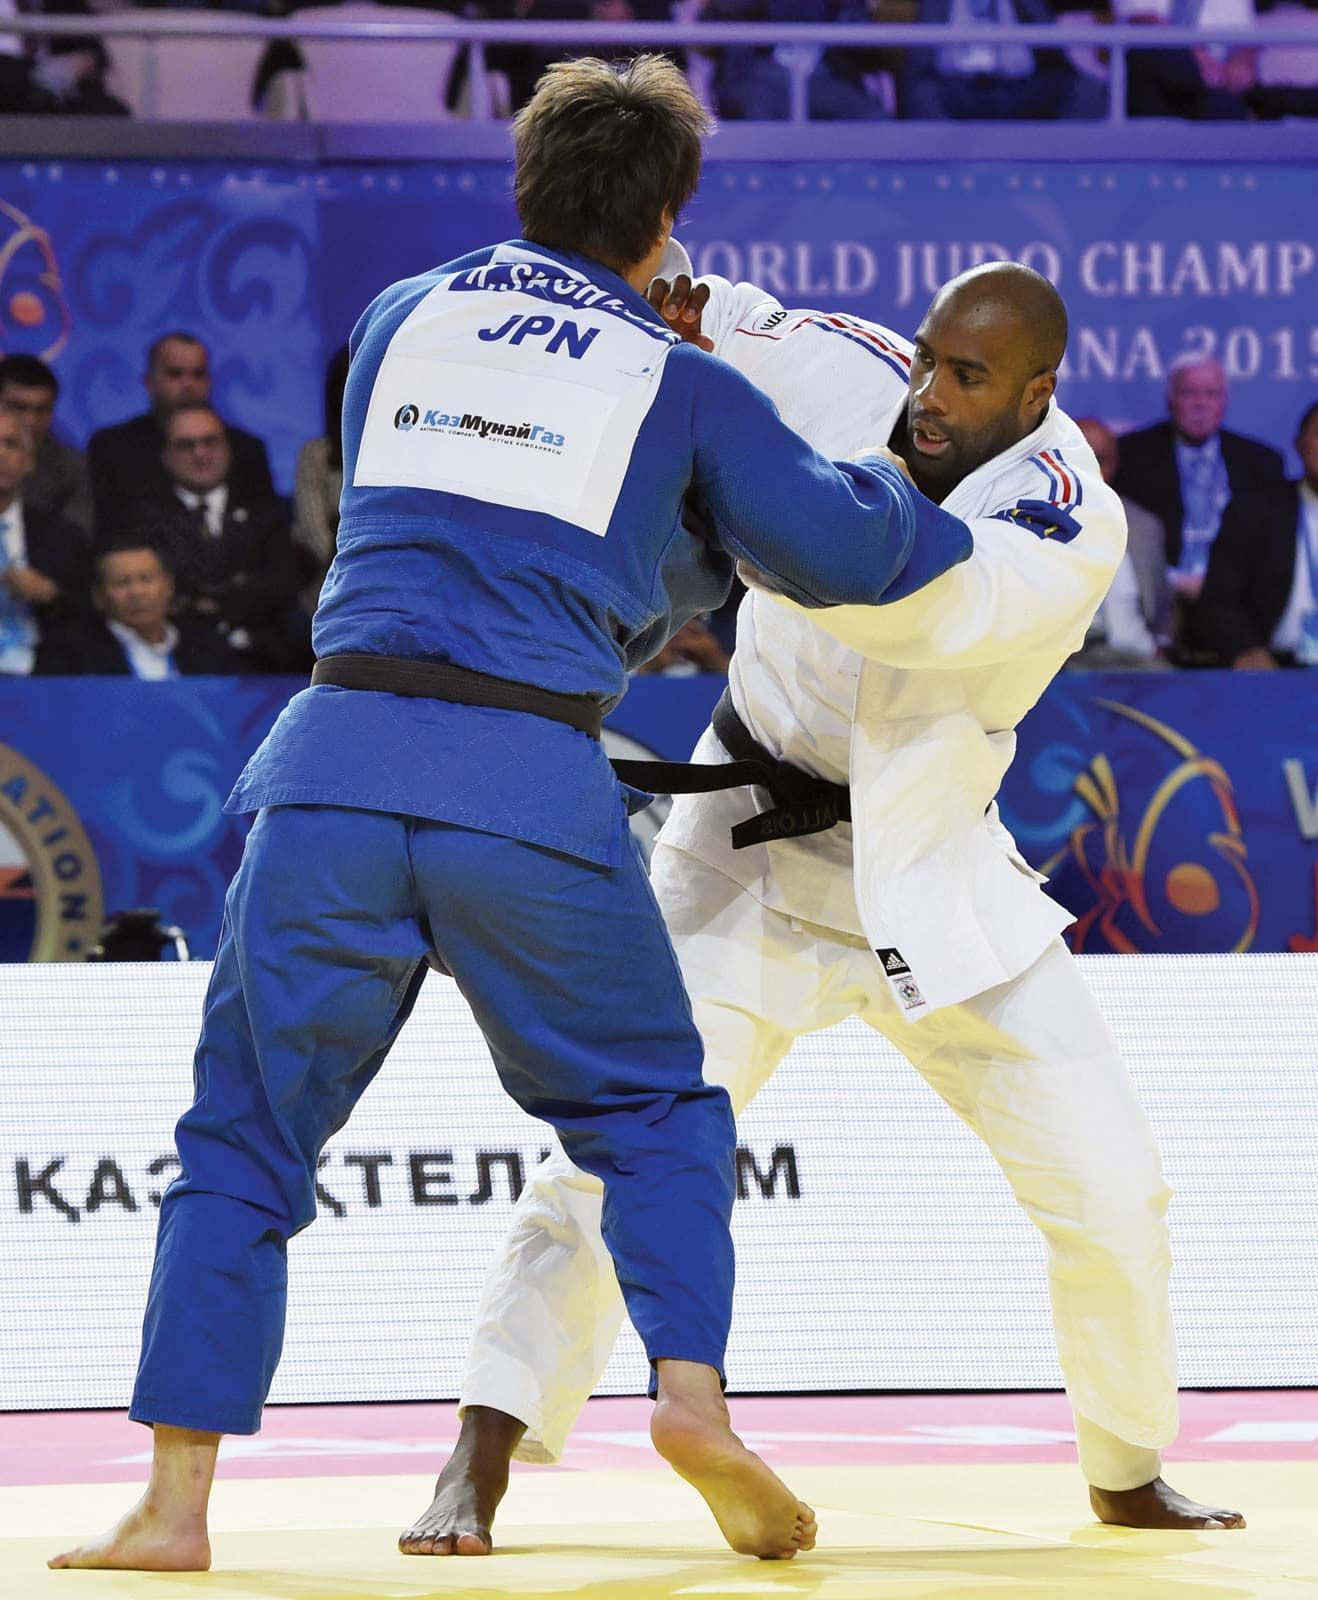 Two Men In Blue Judo Uniforms Are Fighting